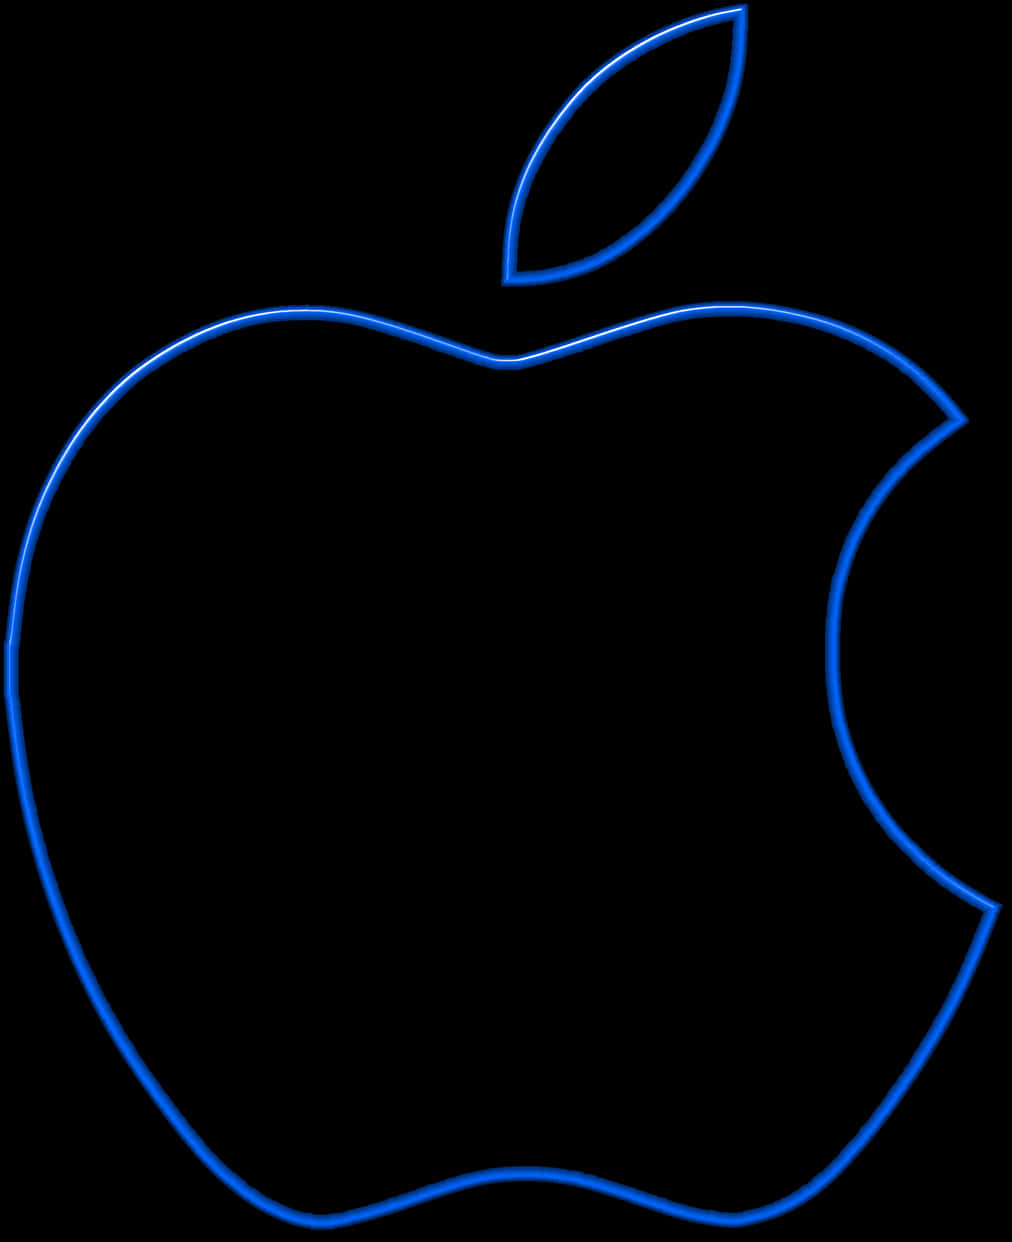 A Blue Apple Logo With A Bite Taken Out Of It